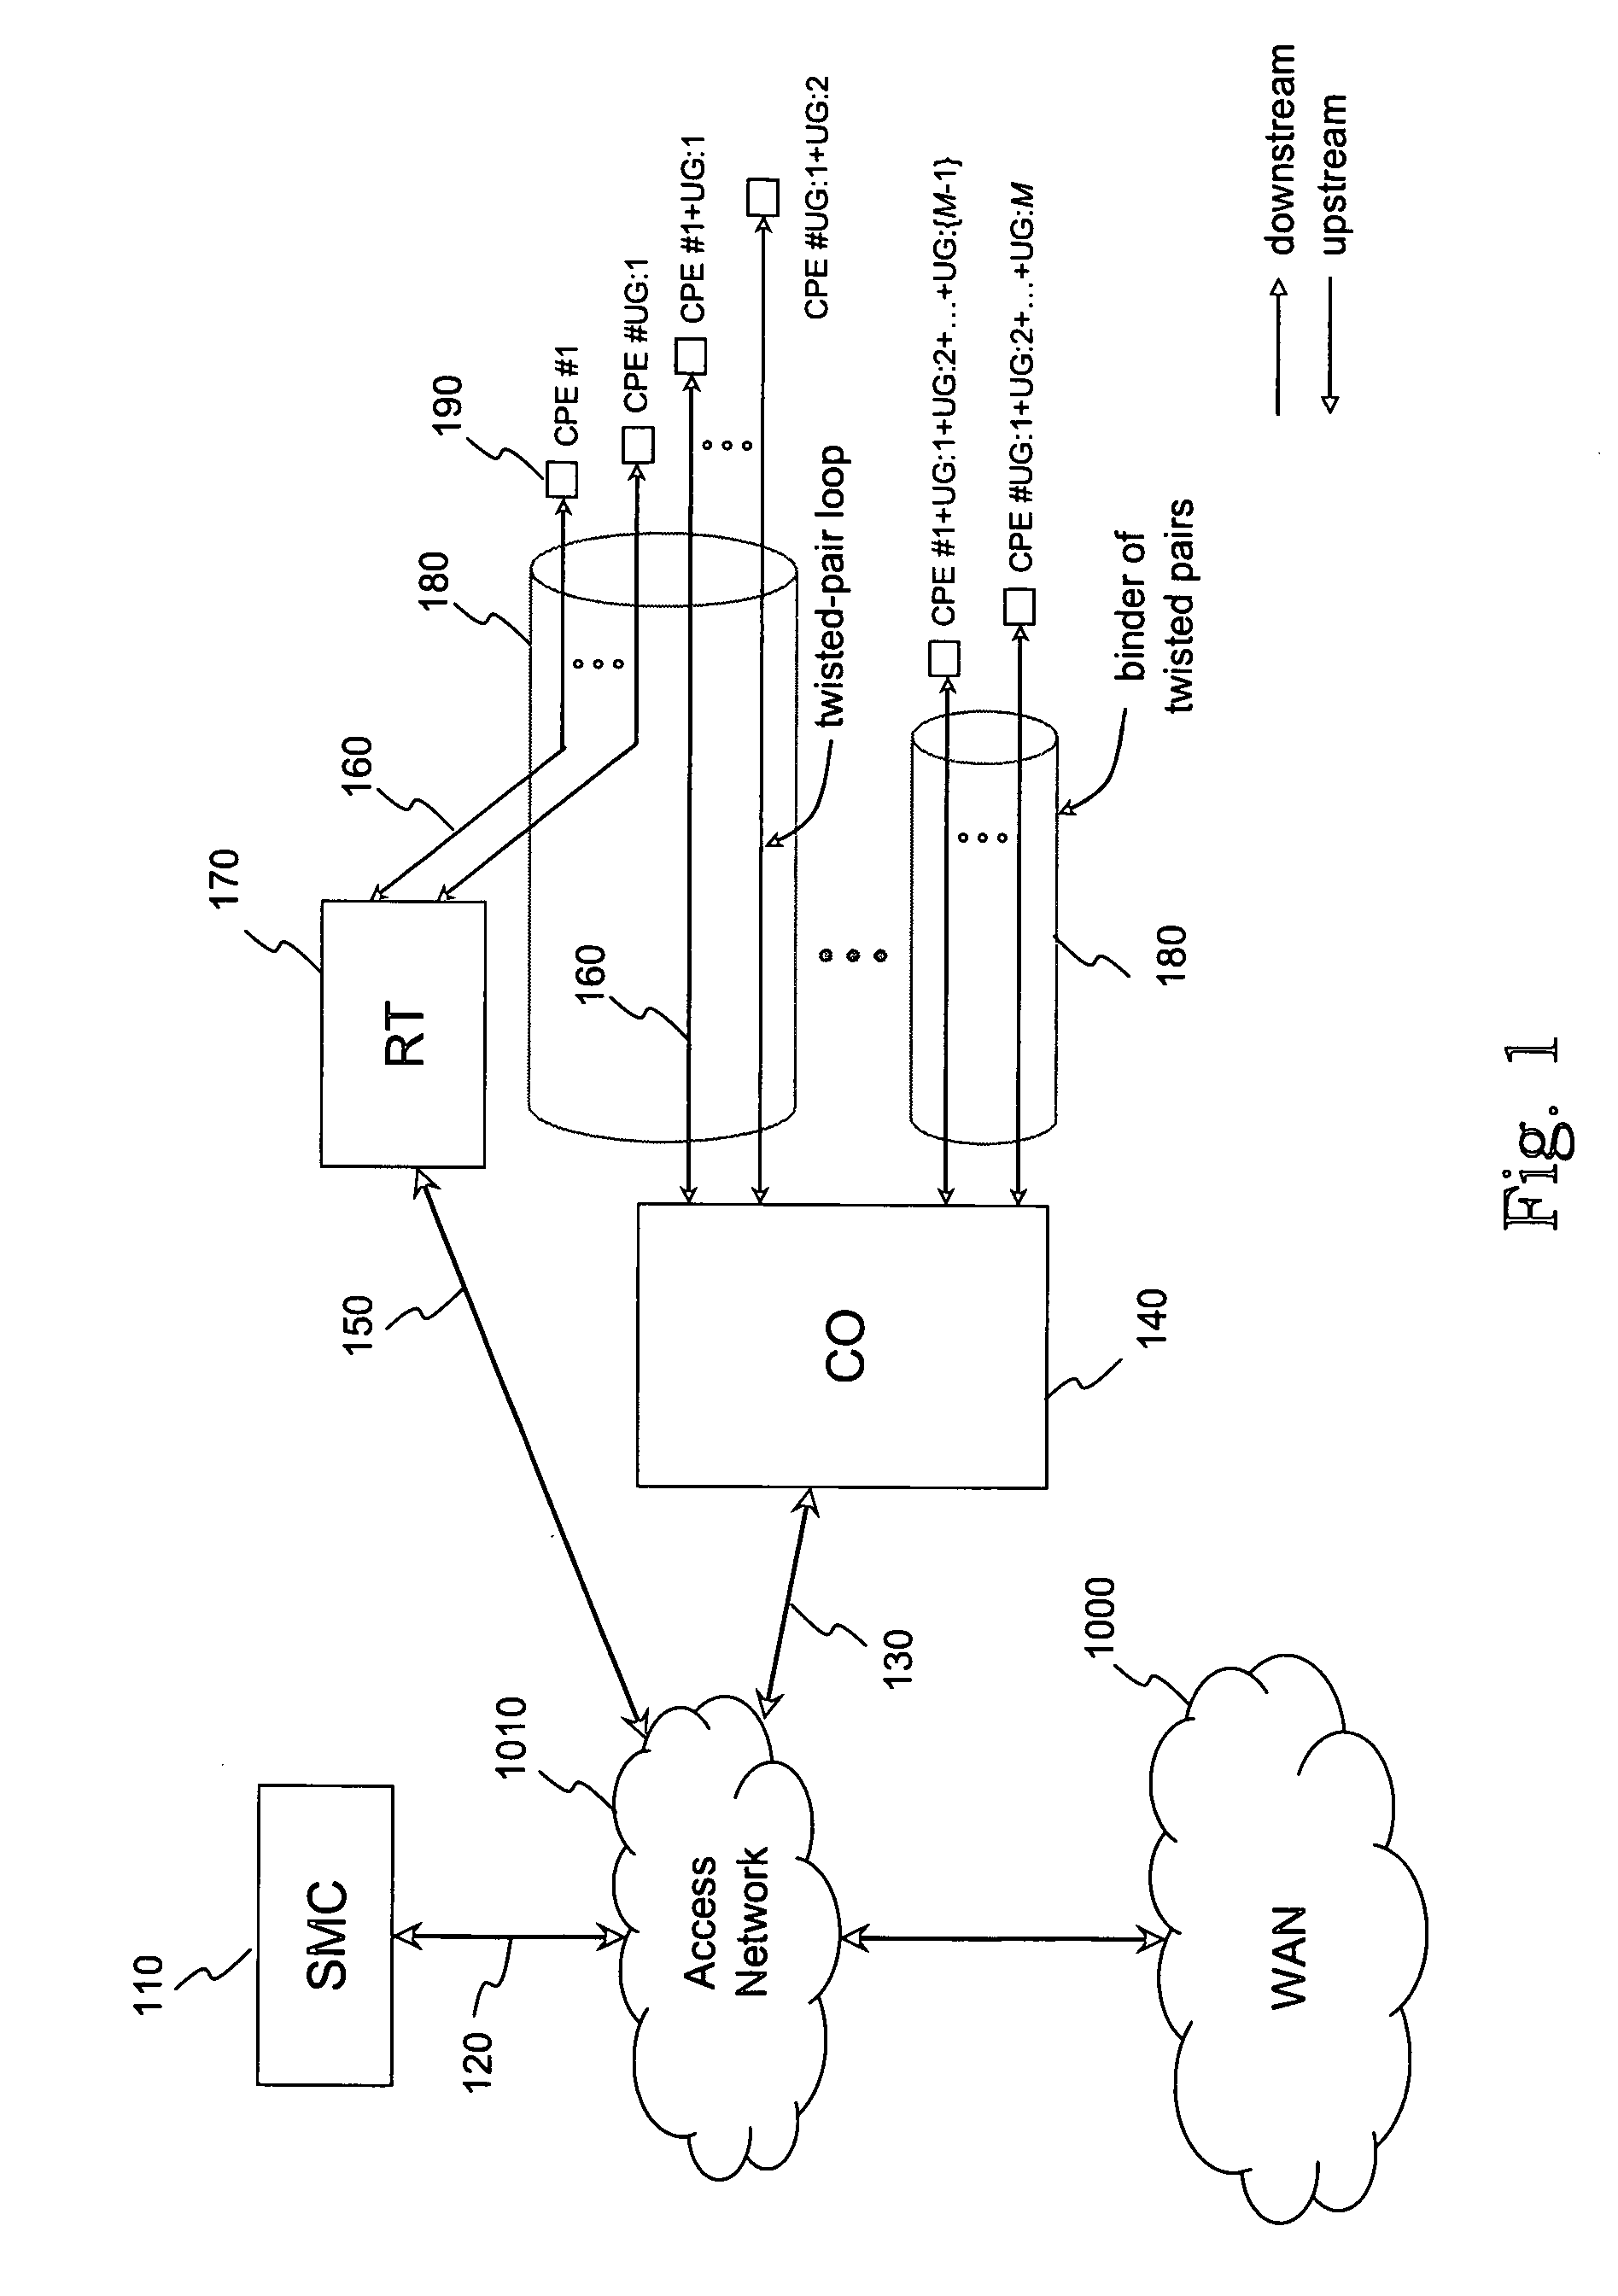 Method for distributed spectrum management of digital communications systems